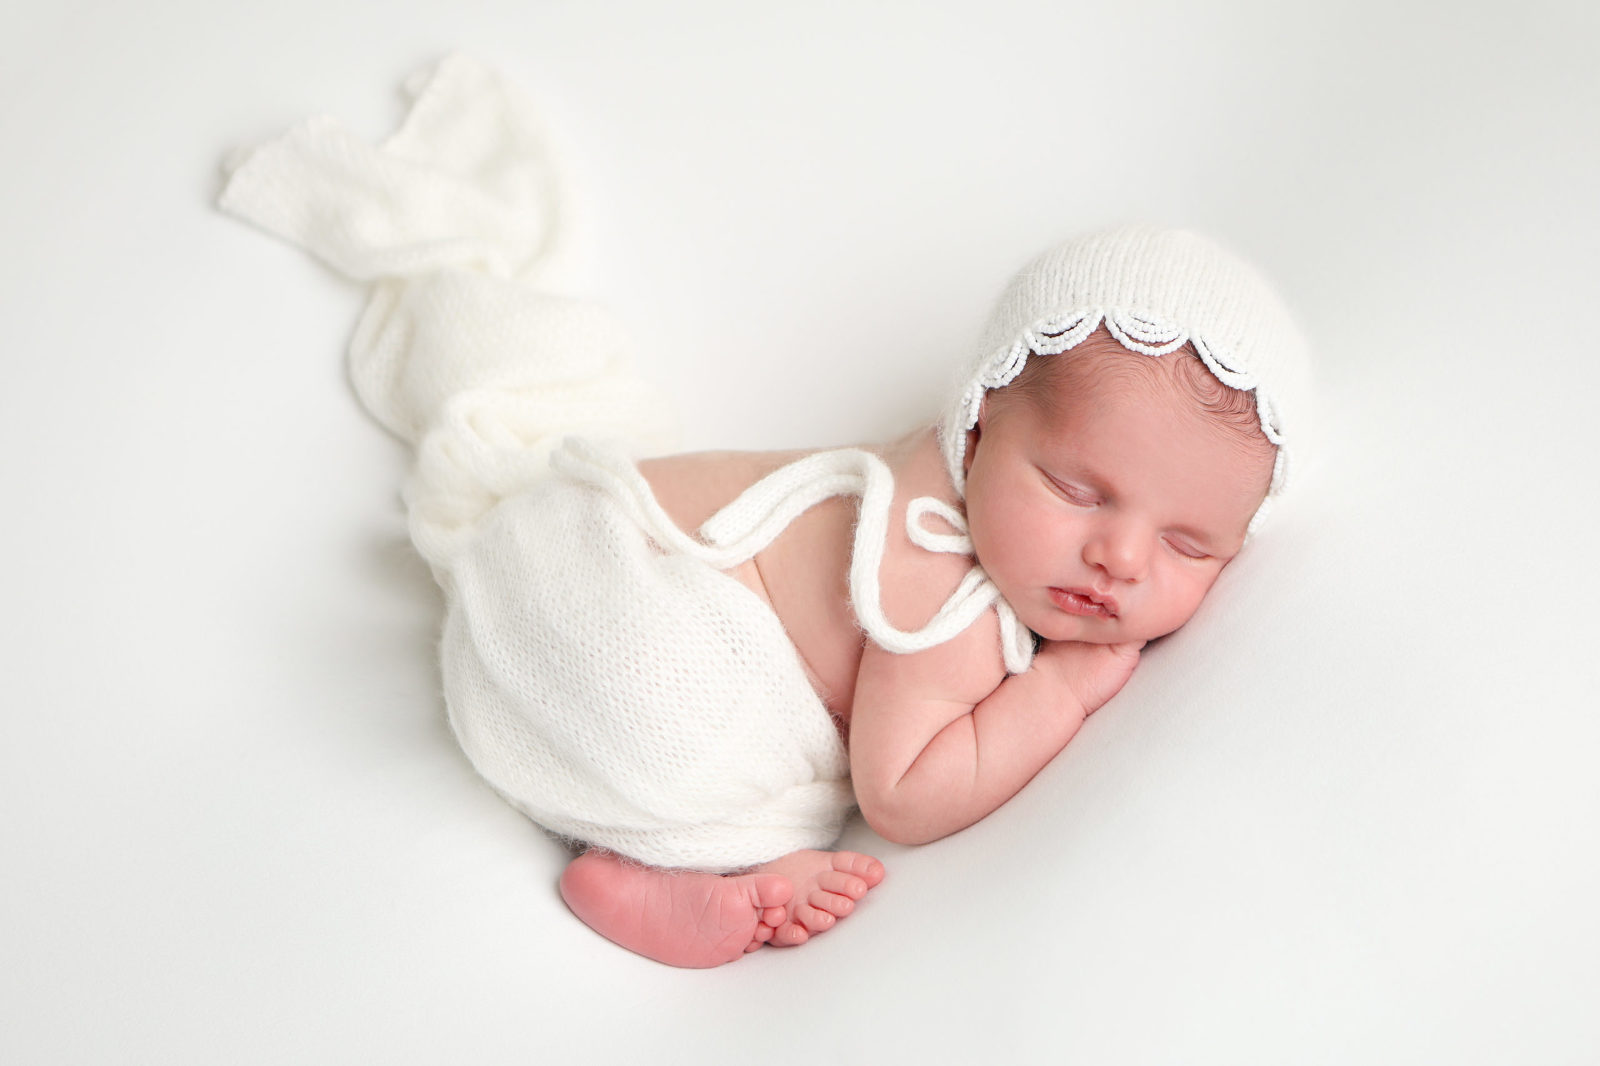 Newborn Baby Girl in white wrap and bonnet.